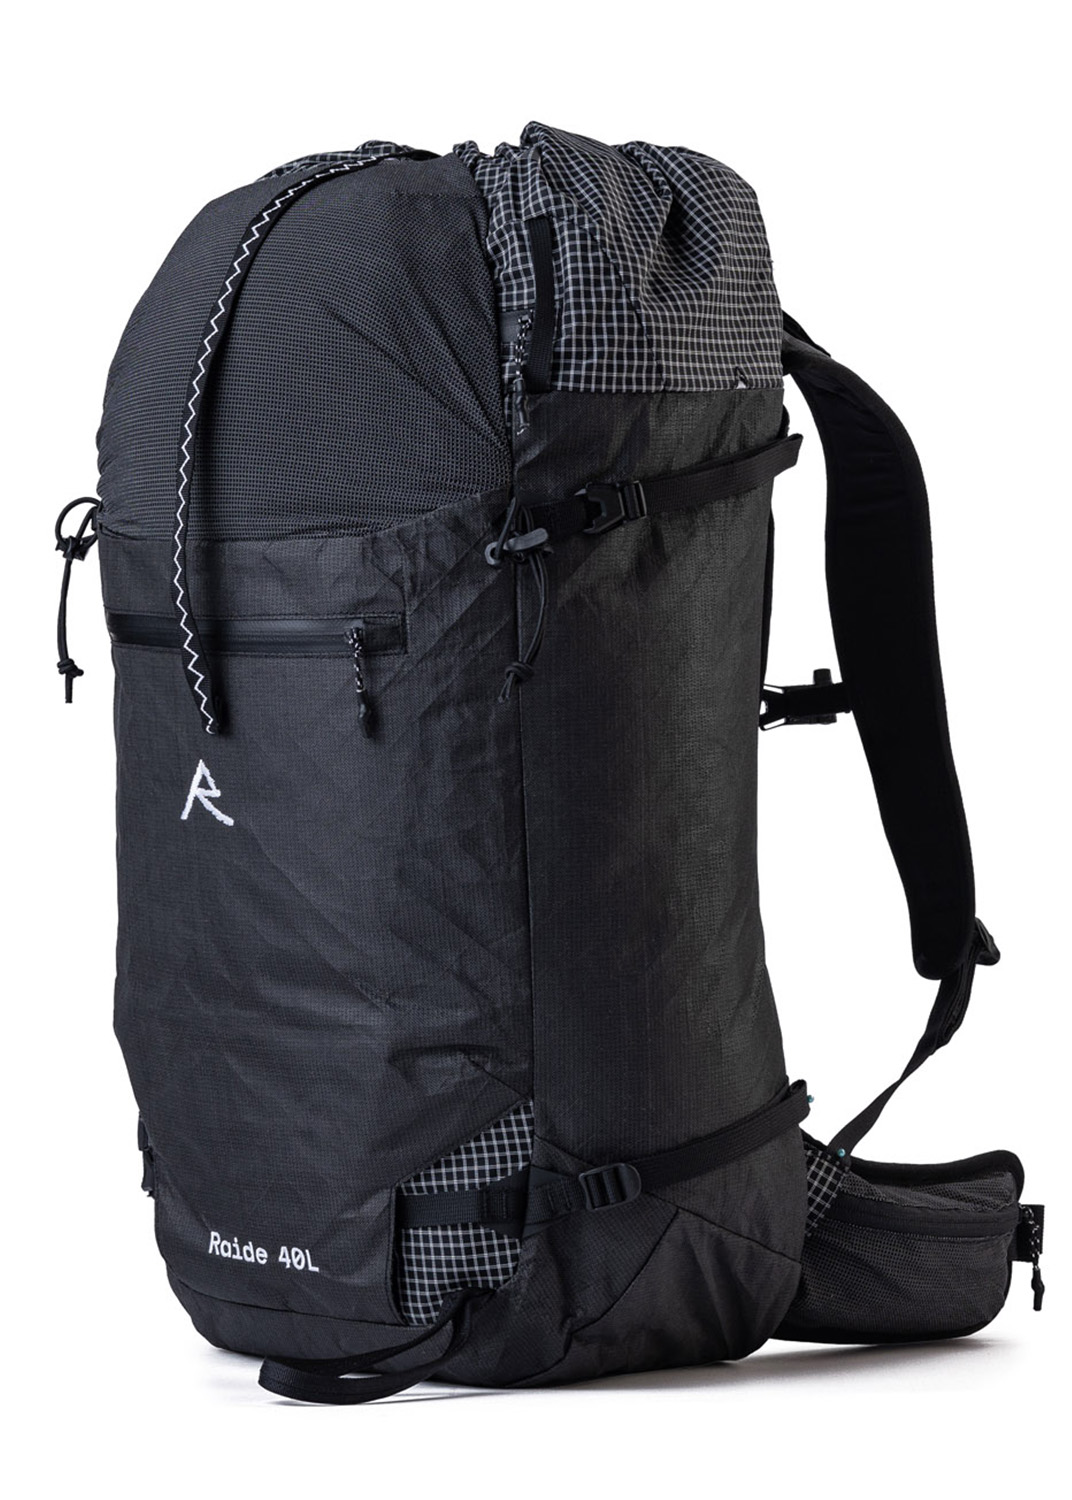 Blister reviews the Raide LF 40L backpack